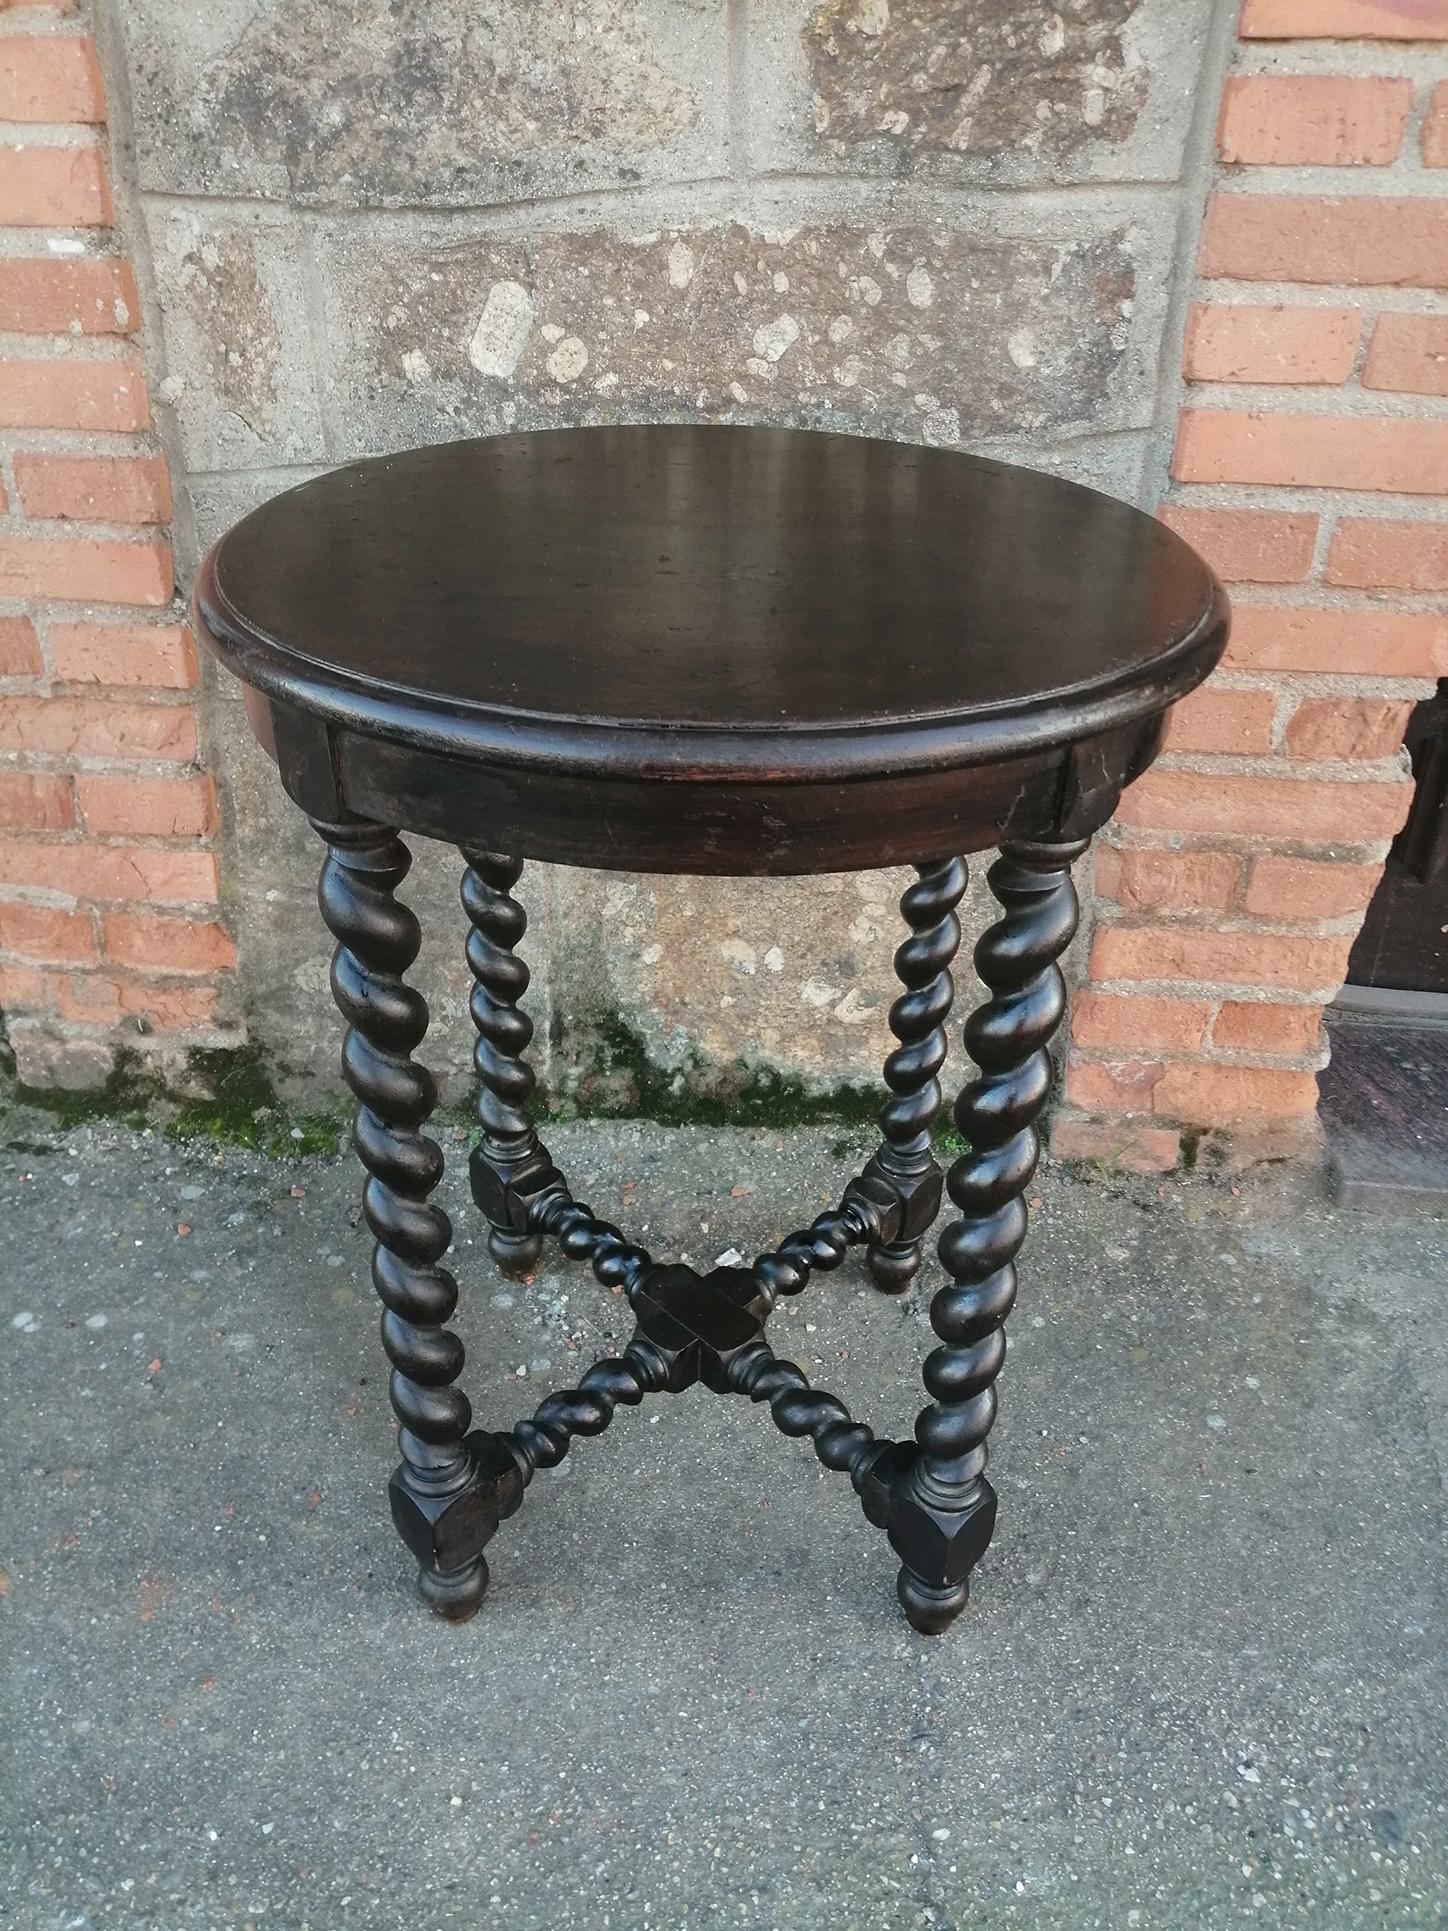 Spanish Round Side Table Features Barley Twist Legs